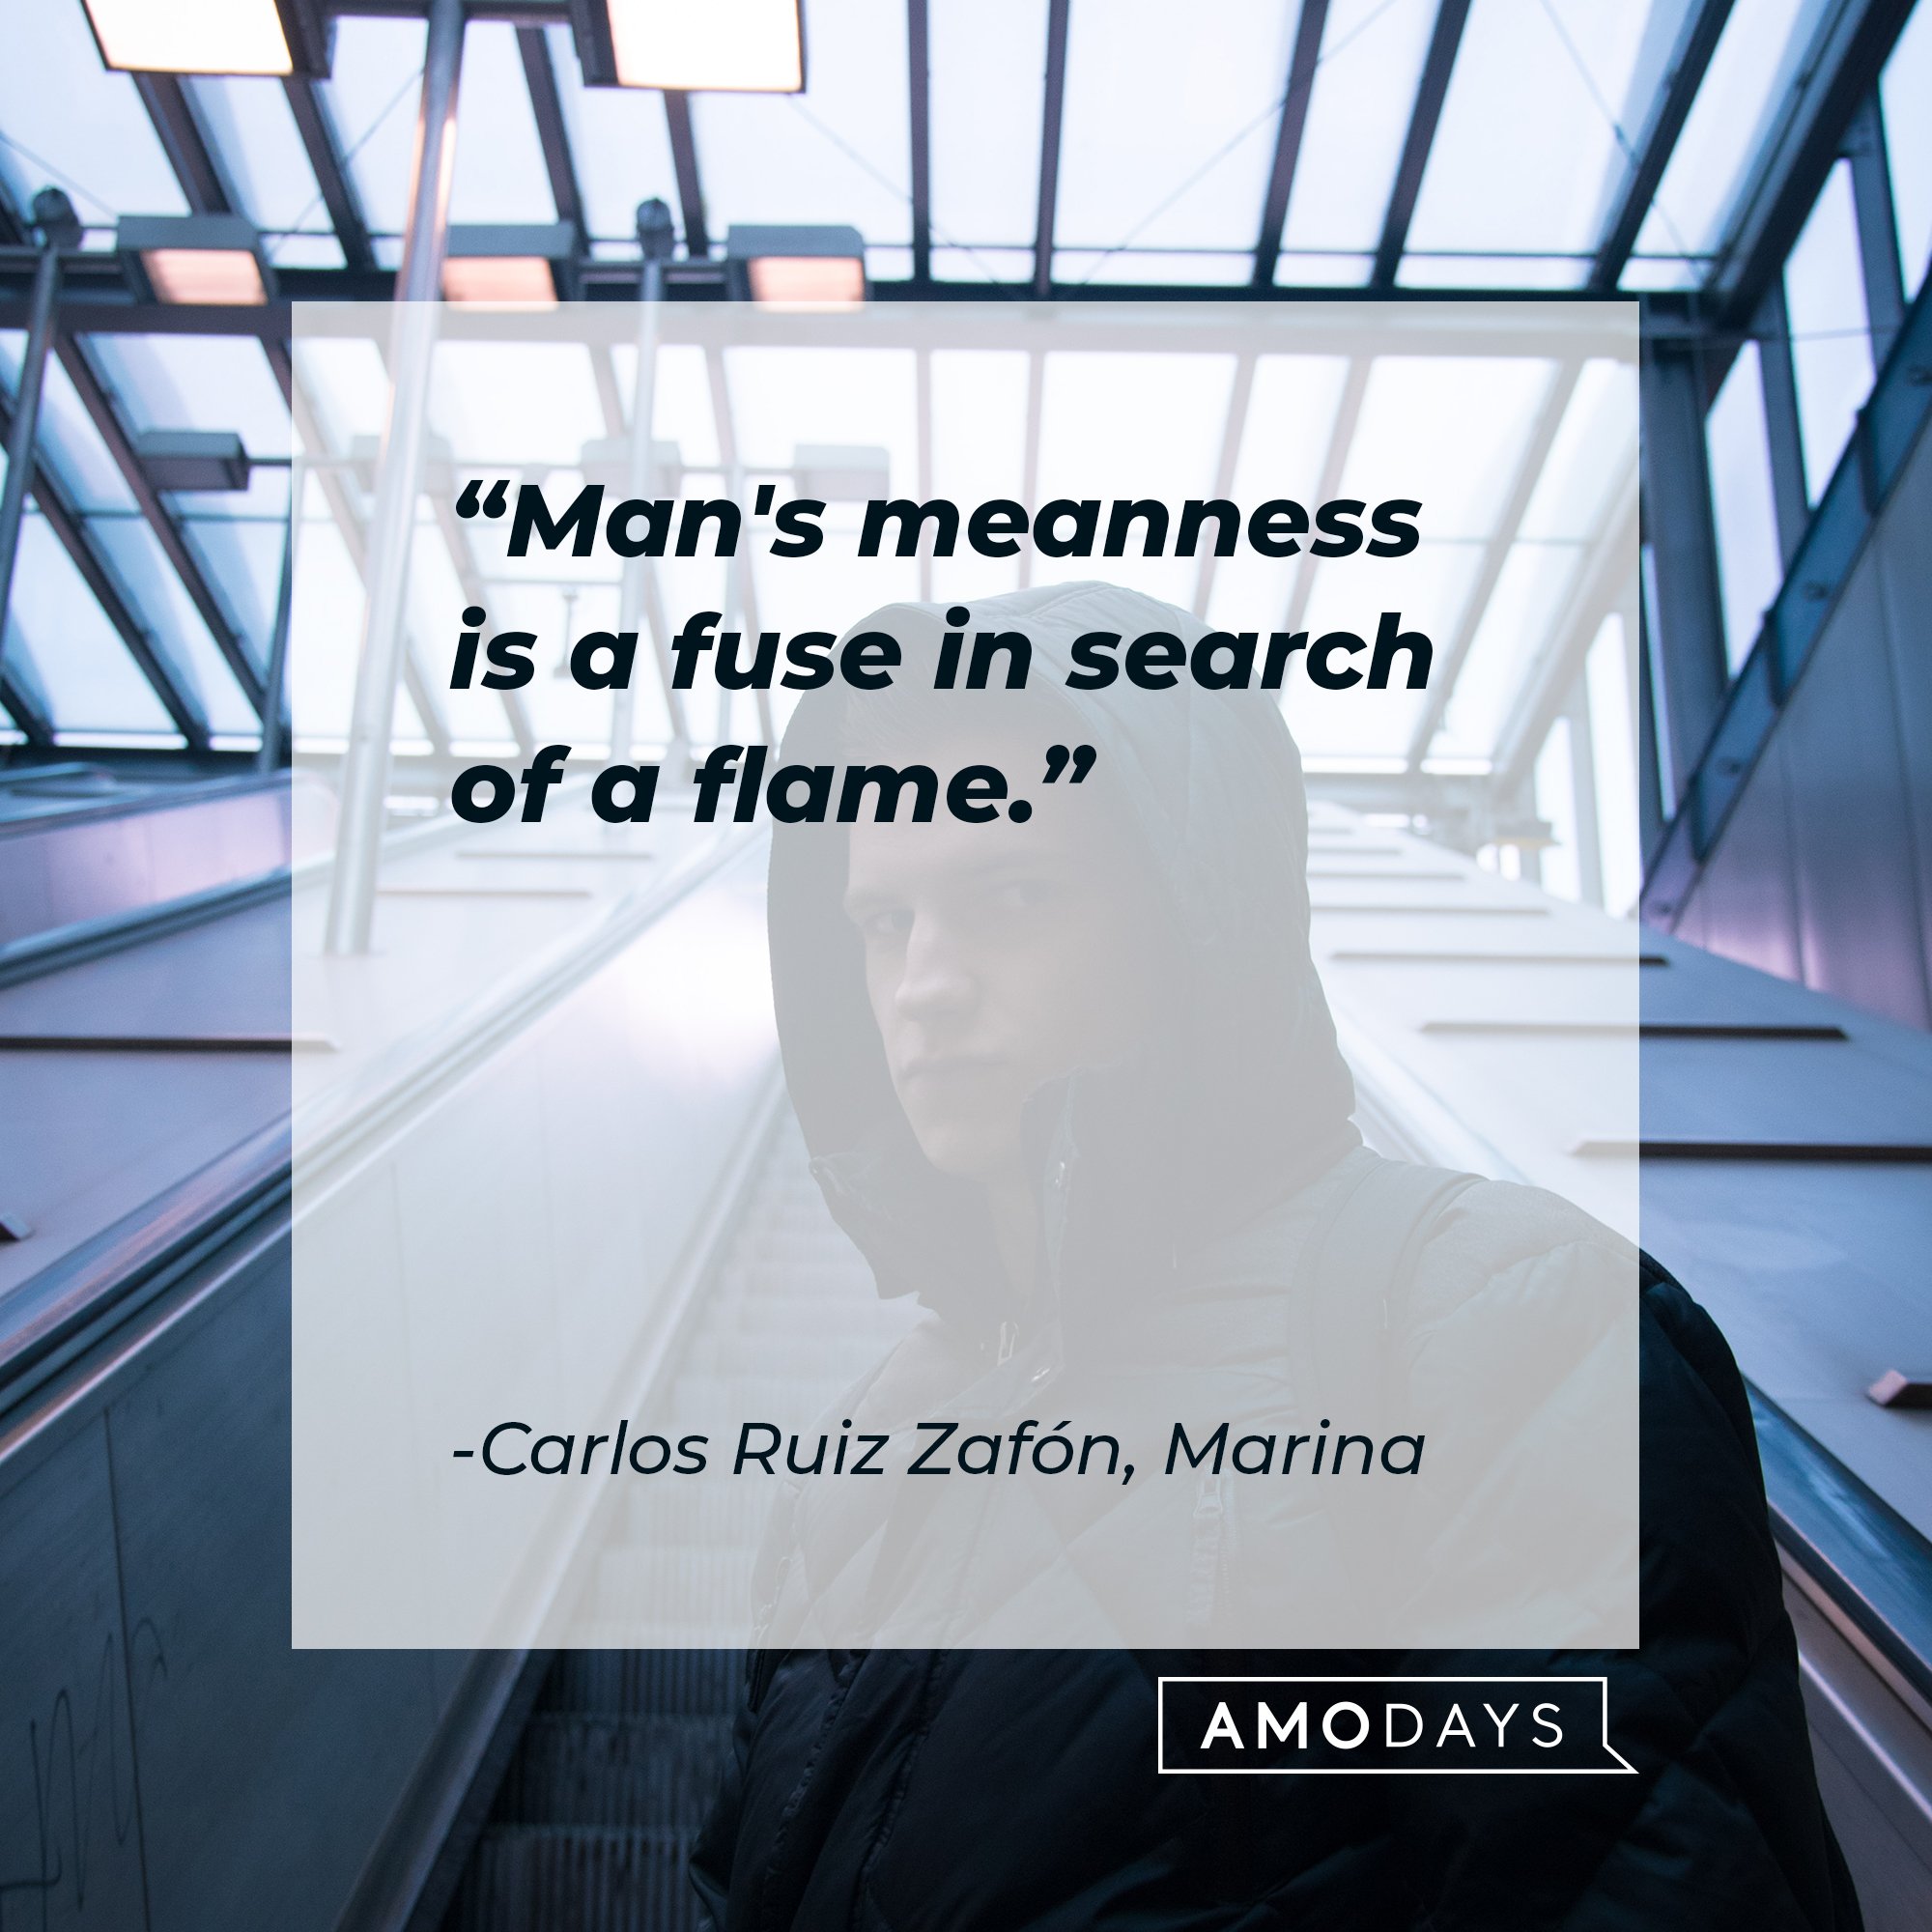 Carlos Ruiz Zafón, Marina's quote: "Man's meanness is a fuse in search of a flame." | Image: AmoDays